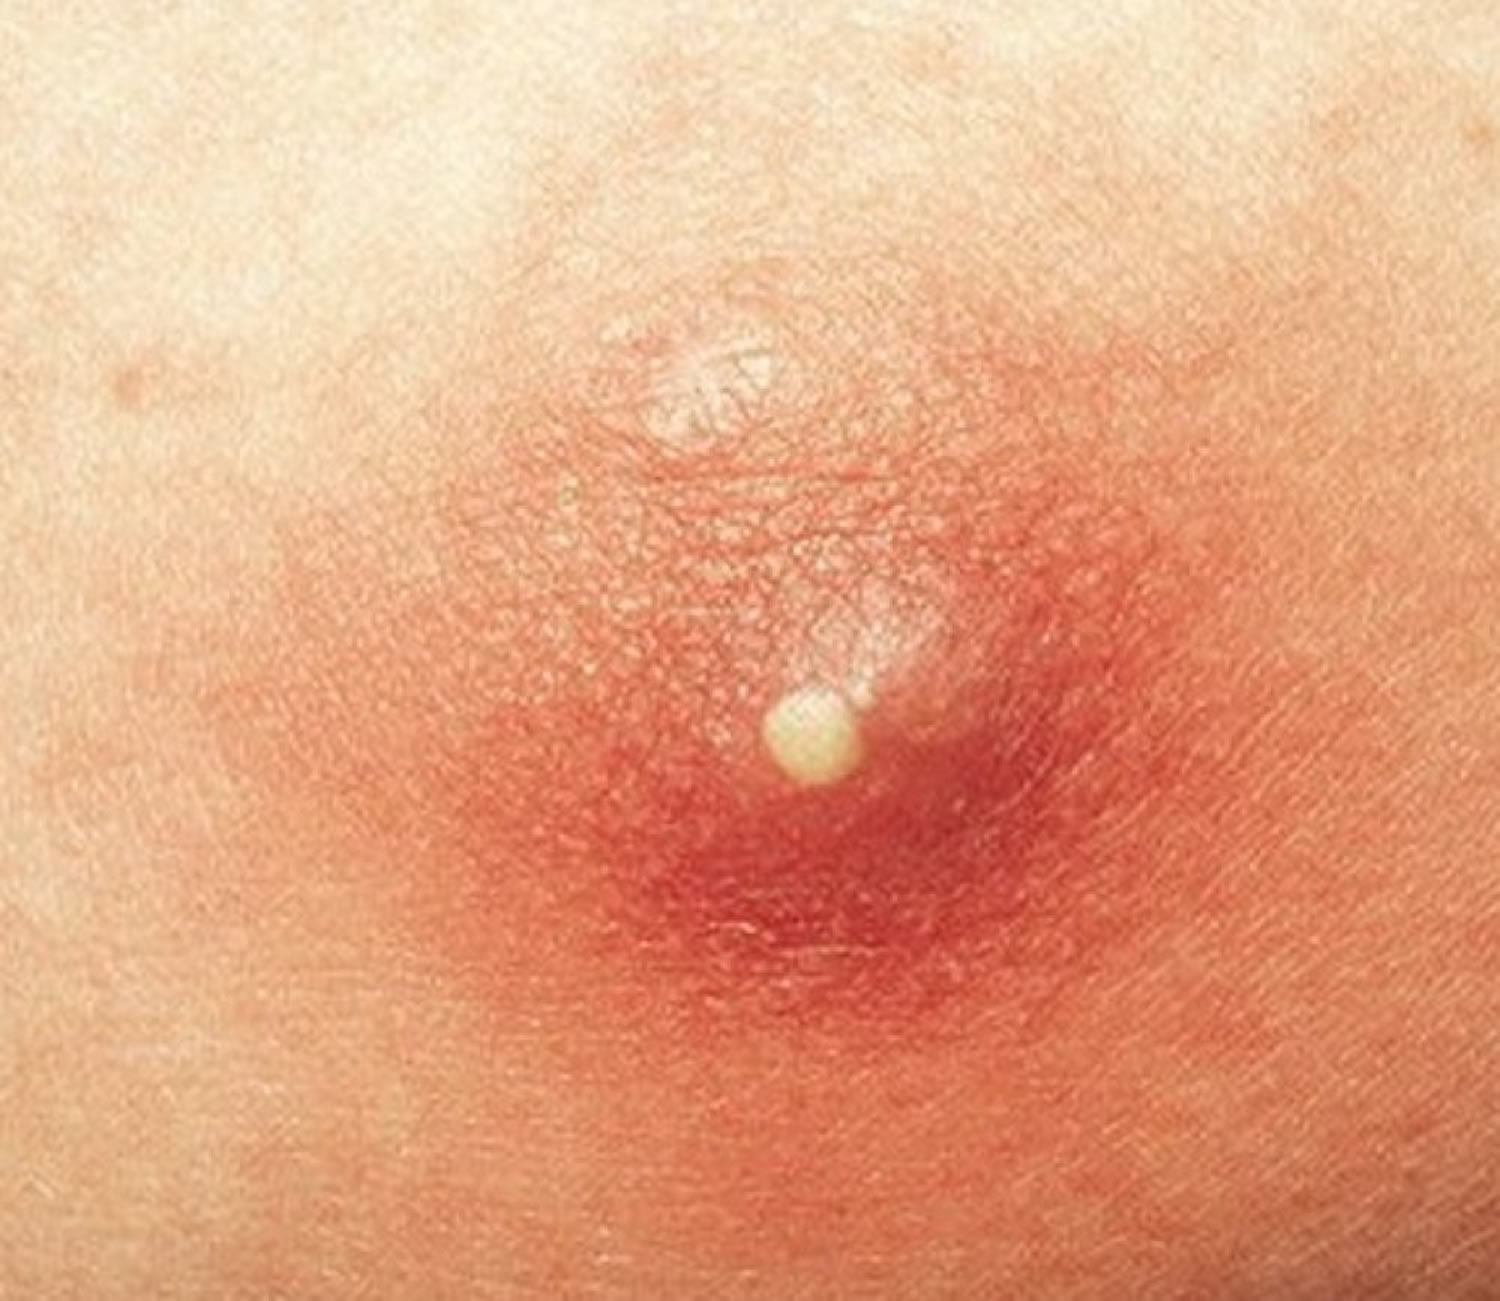 Pimples the of penis rid get to on What to